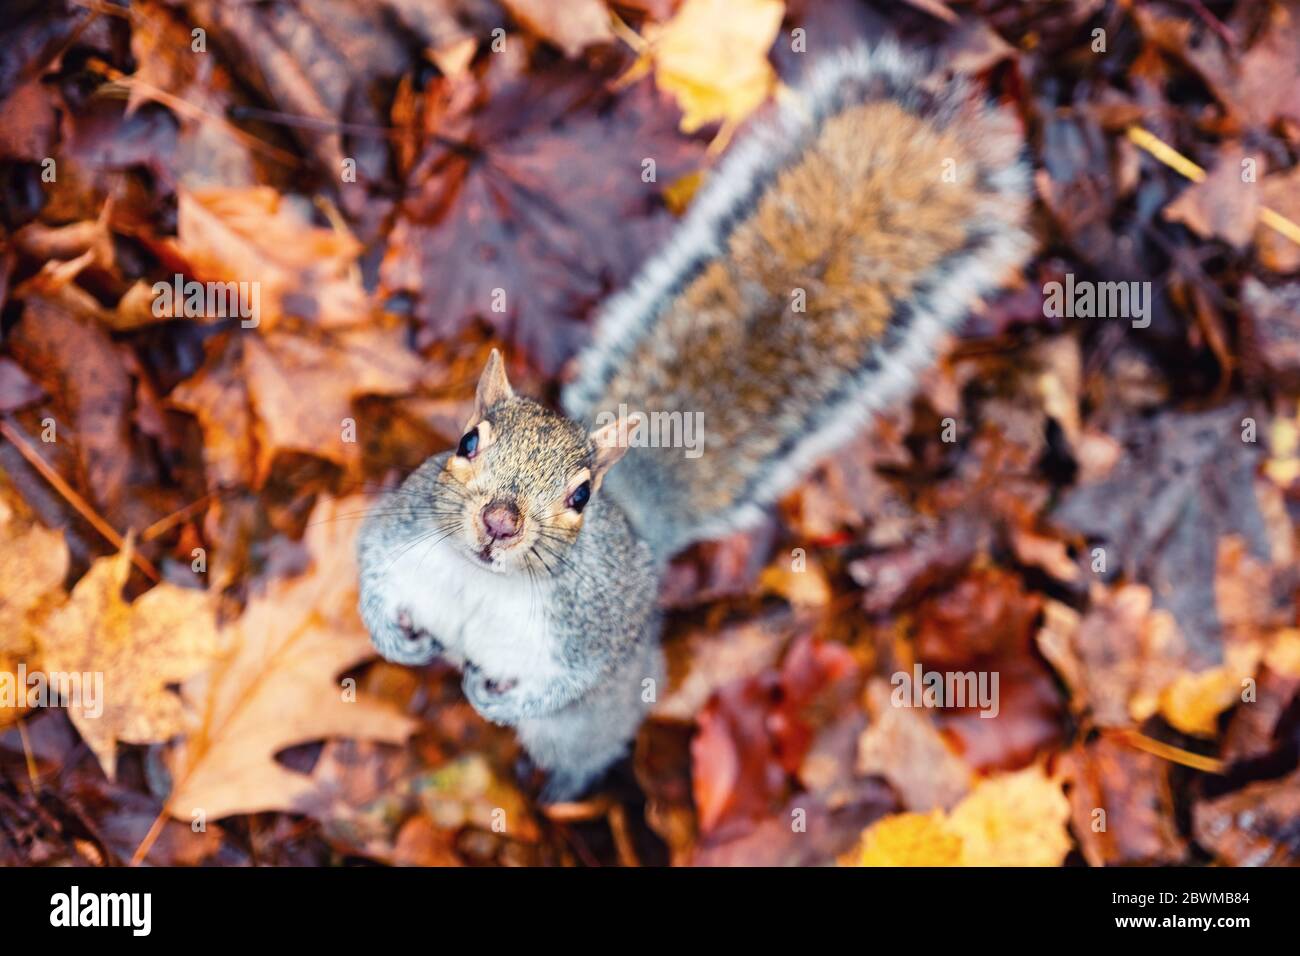 Squirrel in the autumn. Squirrel looking at the camera with the red and yellow autumn leaves at the background Stock Photo